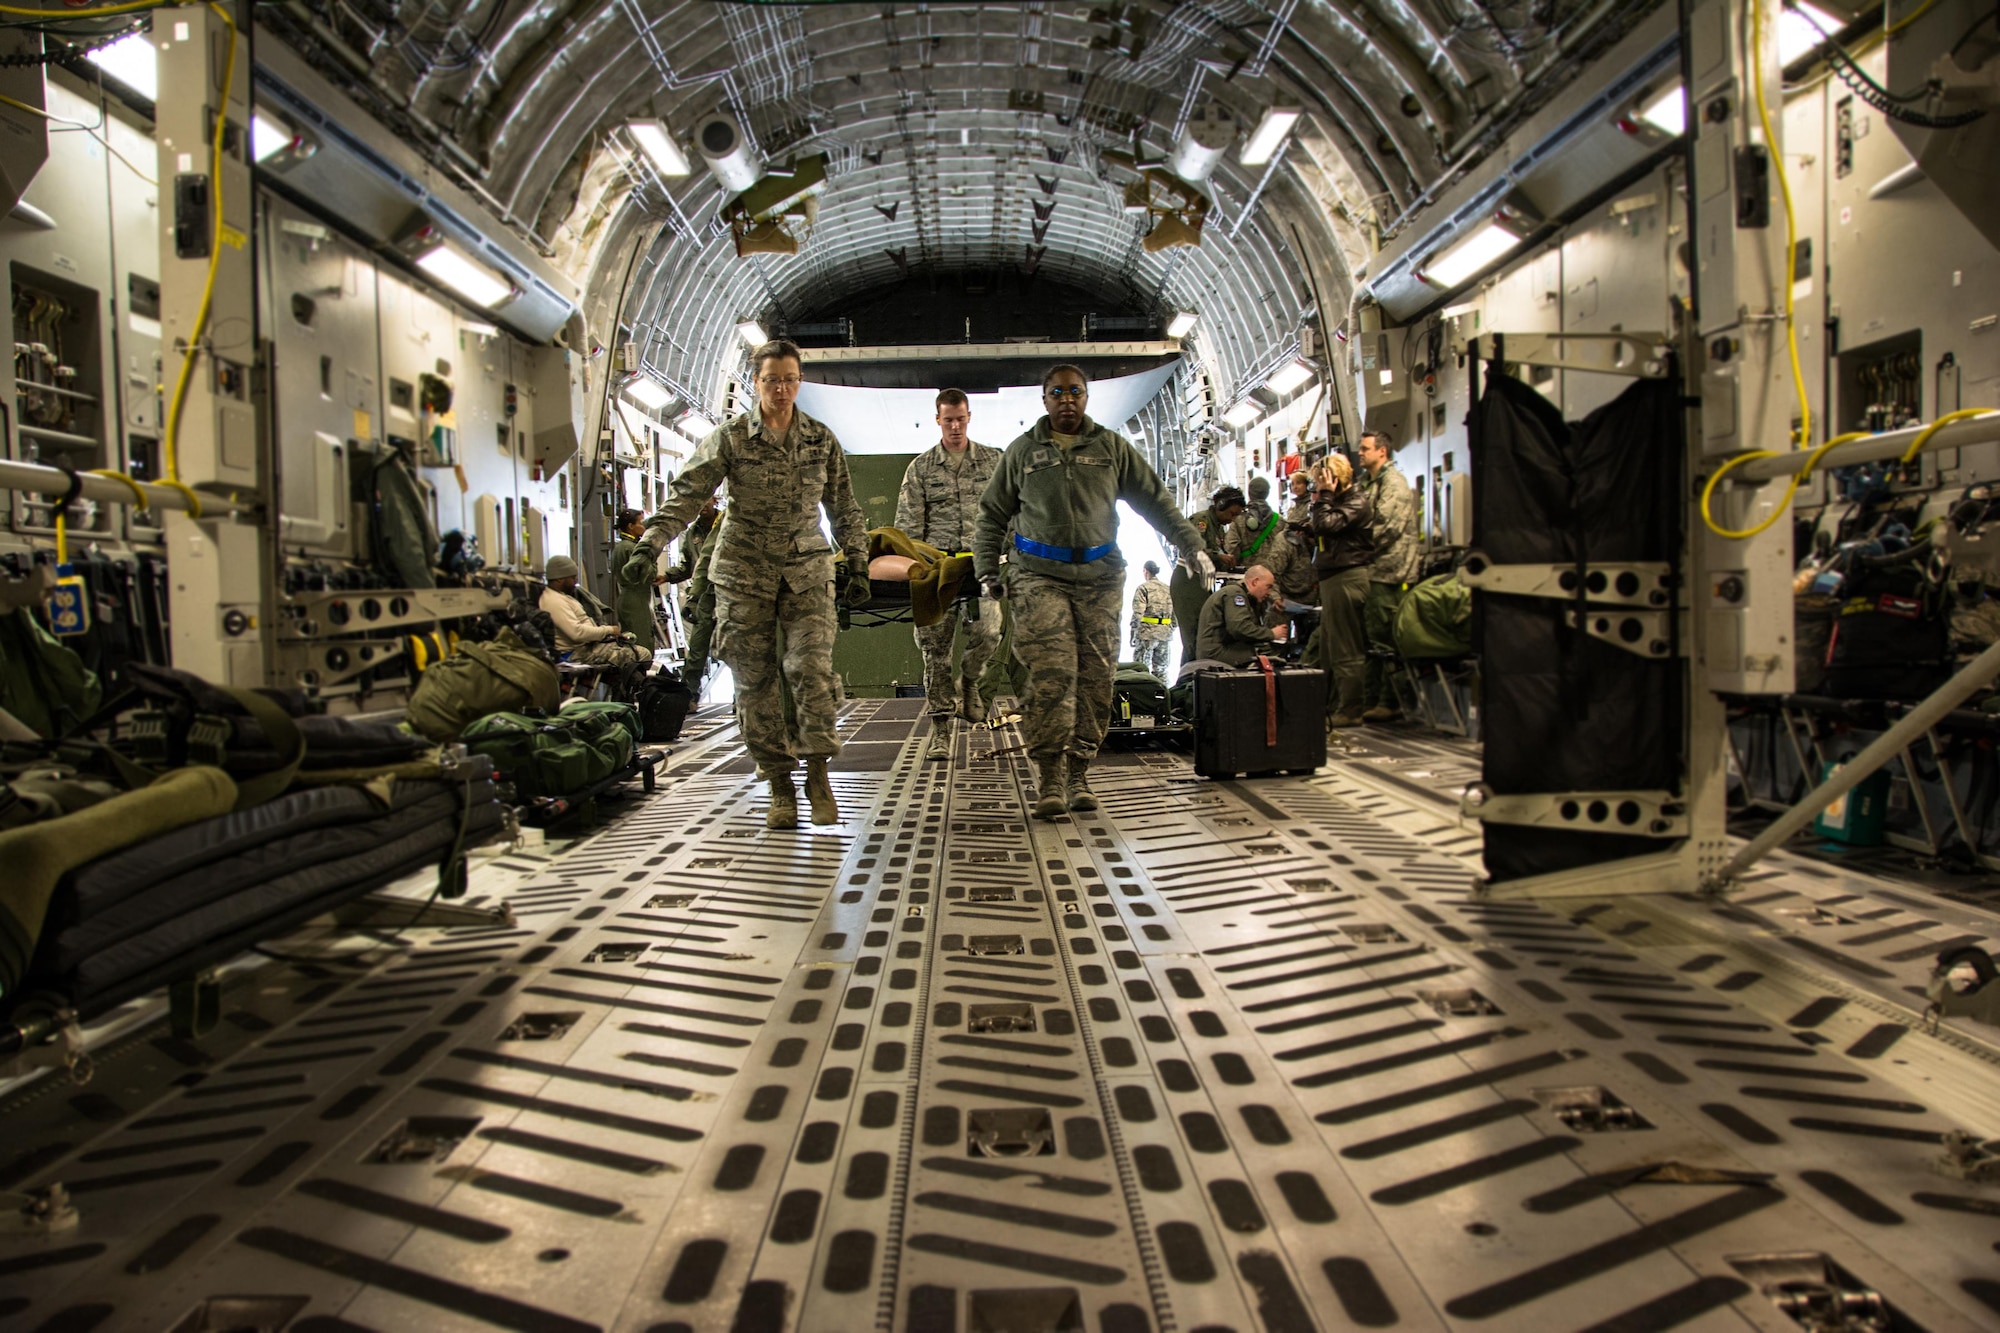 Patriot Delta participants carry a litter with a medical manikin patient onto a C-17 Globemaster III during Patriot Delta at Travis Air Force Base, Calif. on March 24, 2017. Patriot Delta brought in aeromedical evacuations squadrons from the from the 911th Airlift Wing at Pittsburgh Air Reserve Station, Penn., the 908th AW at Maxwell Air Force Base, Miss.; the 932d Airlift Wing at Scott AFB, Ill.; and the 349th Air Mobility Wing at Travis AFB. (U.S. Air Force photo by Staff Sgt. Daniel Phelps)